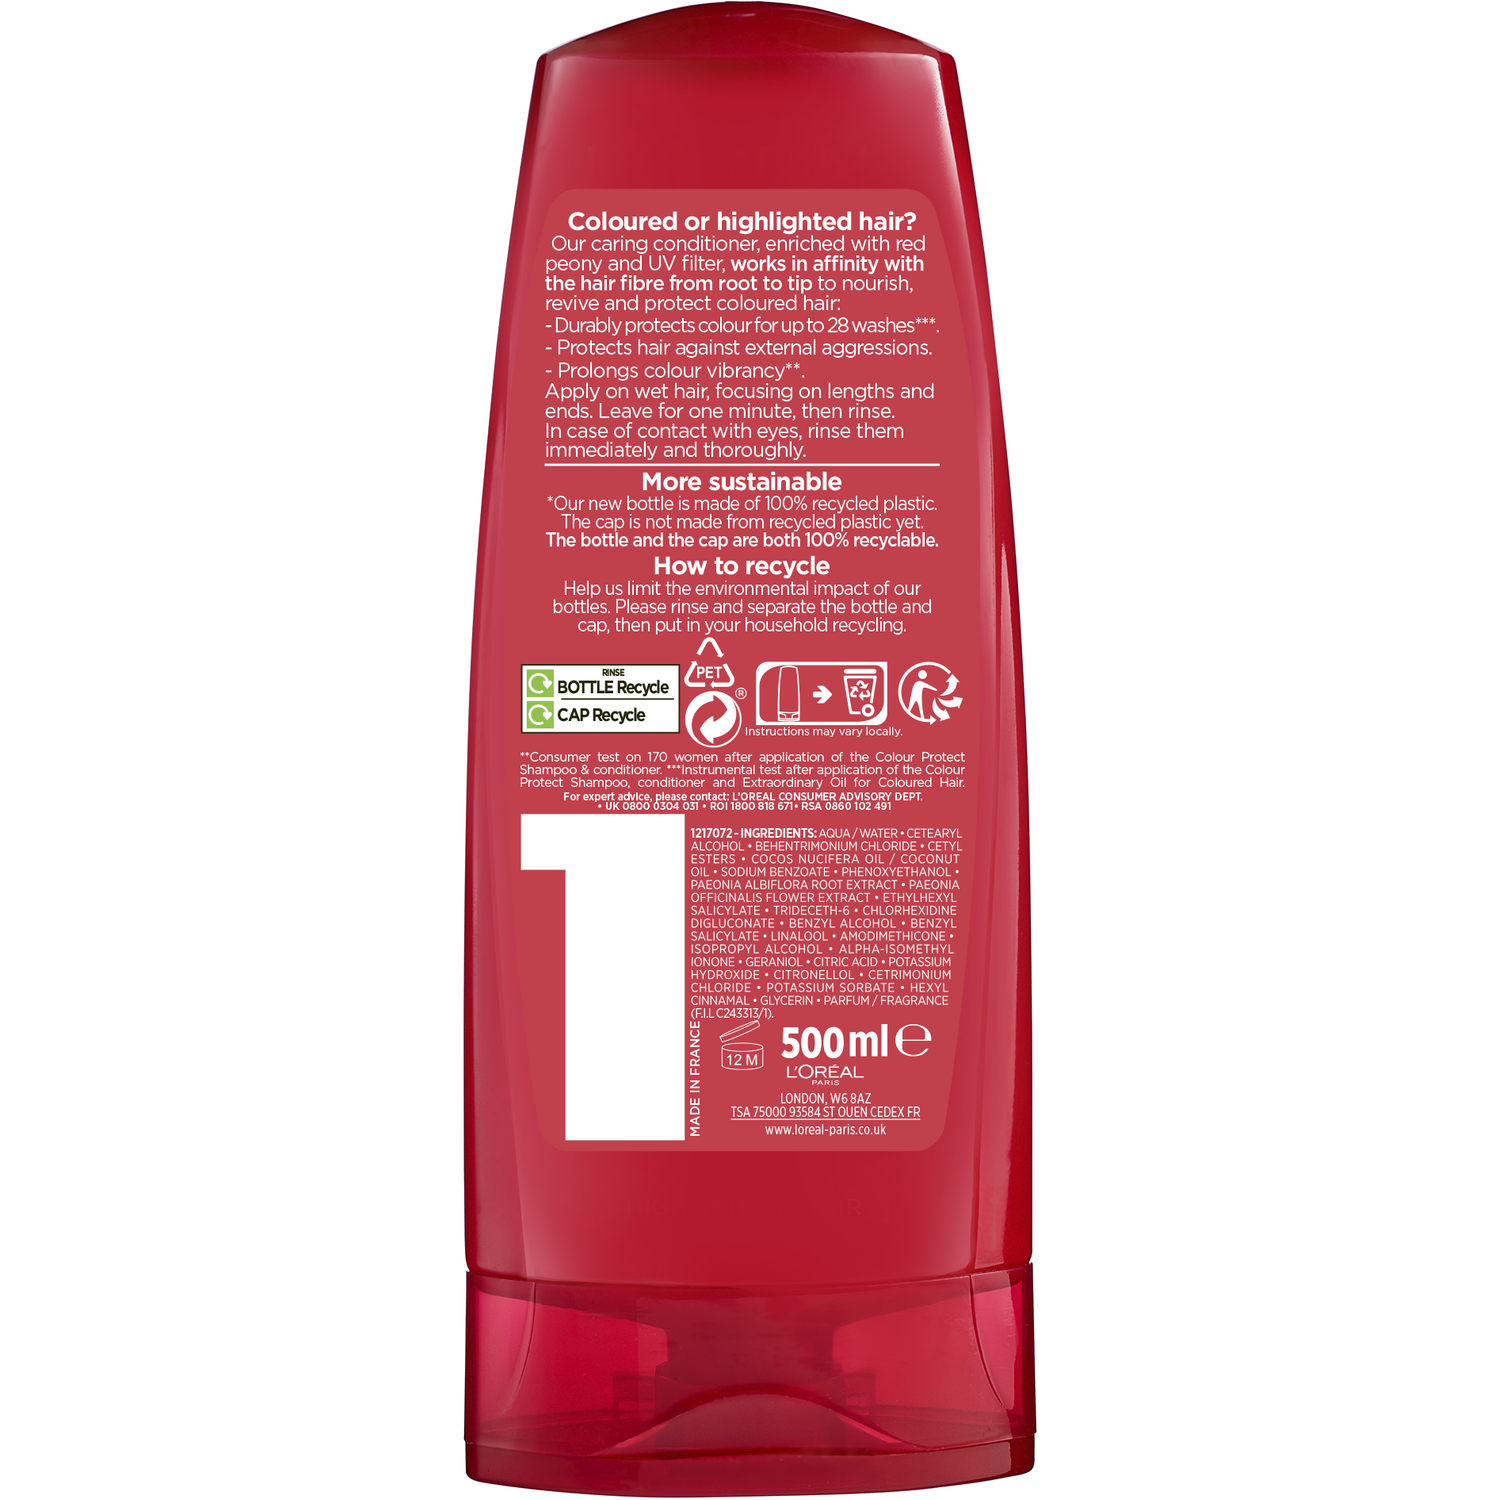 Elvive Colour Protect Conditioner 500ml - Red Image 2